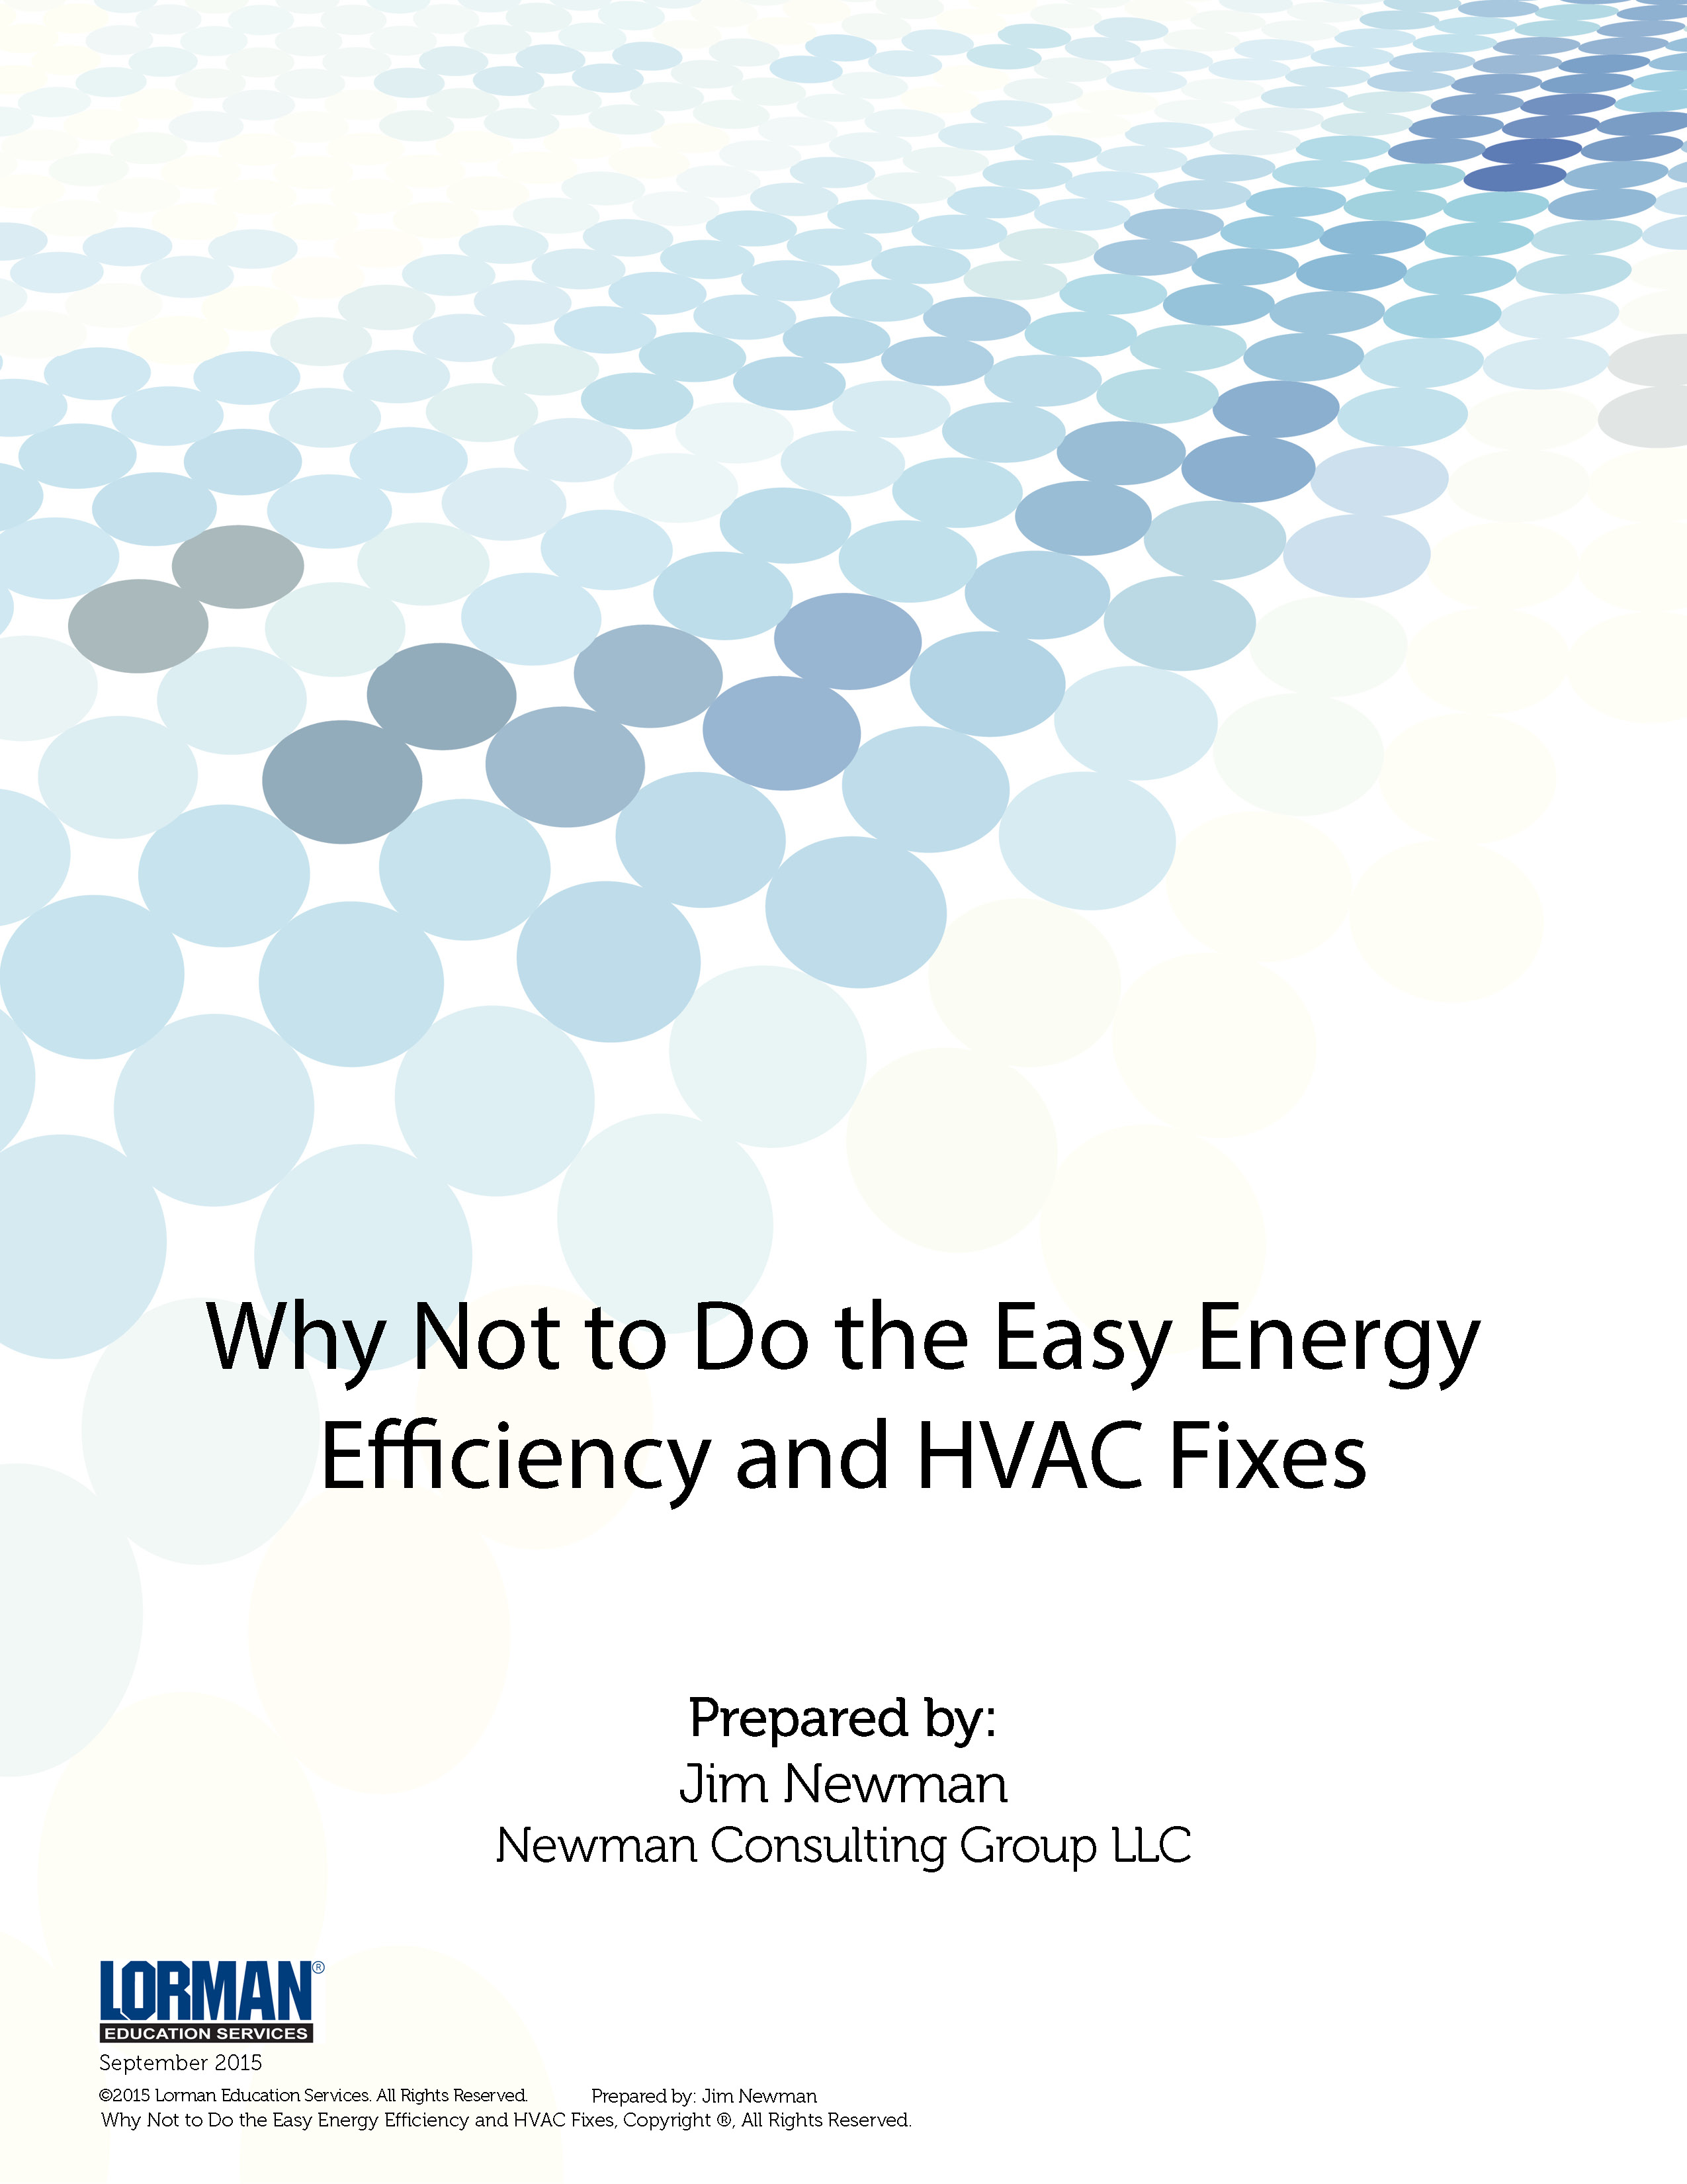 Why Not to Do the Easy Energy Efficiency and HVAC Fixes